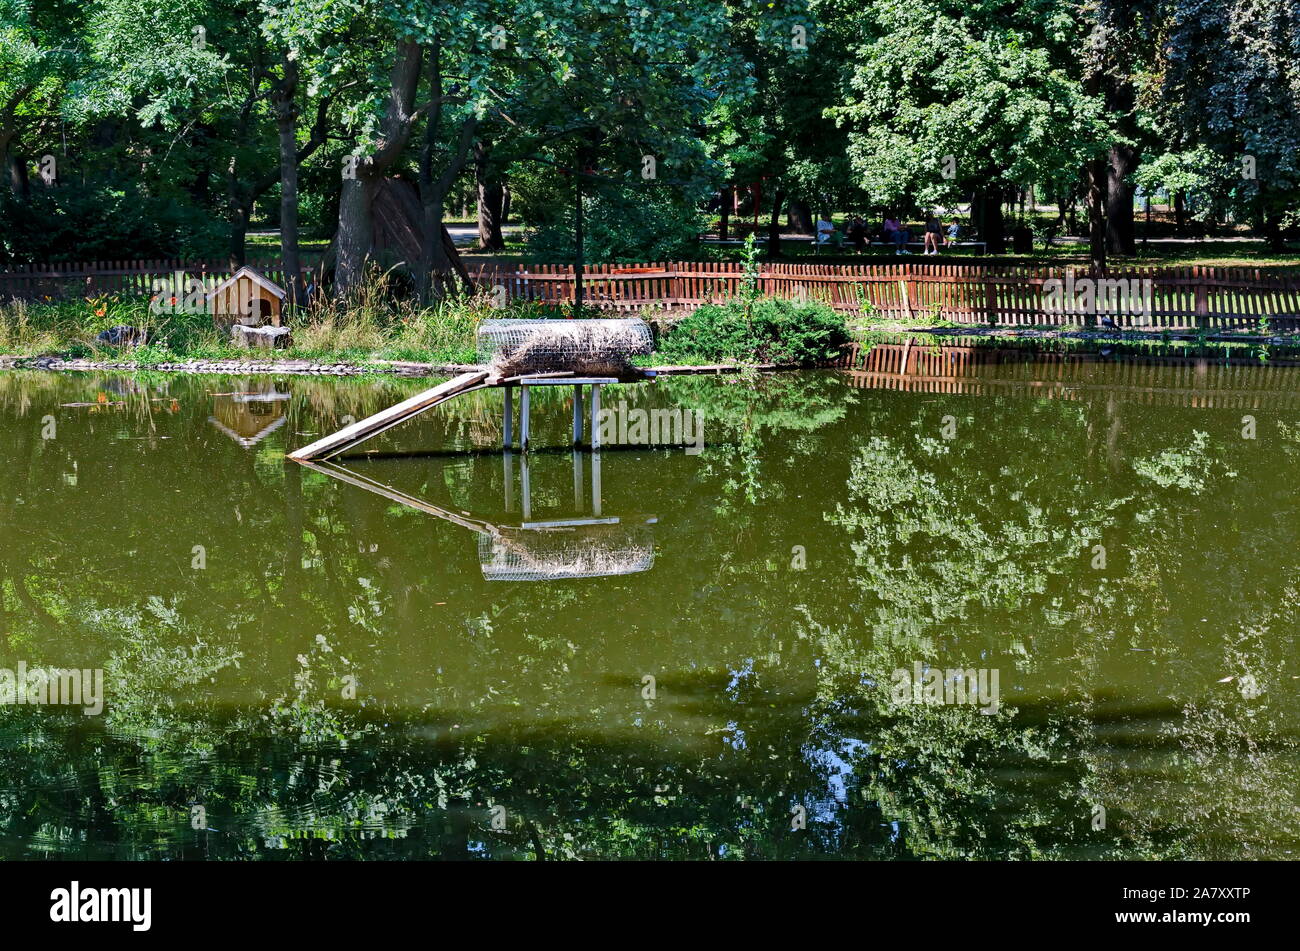 A small house built into the lake and nesting place for ducks in the city garden, Sofia, Bulgaria Stock Photo